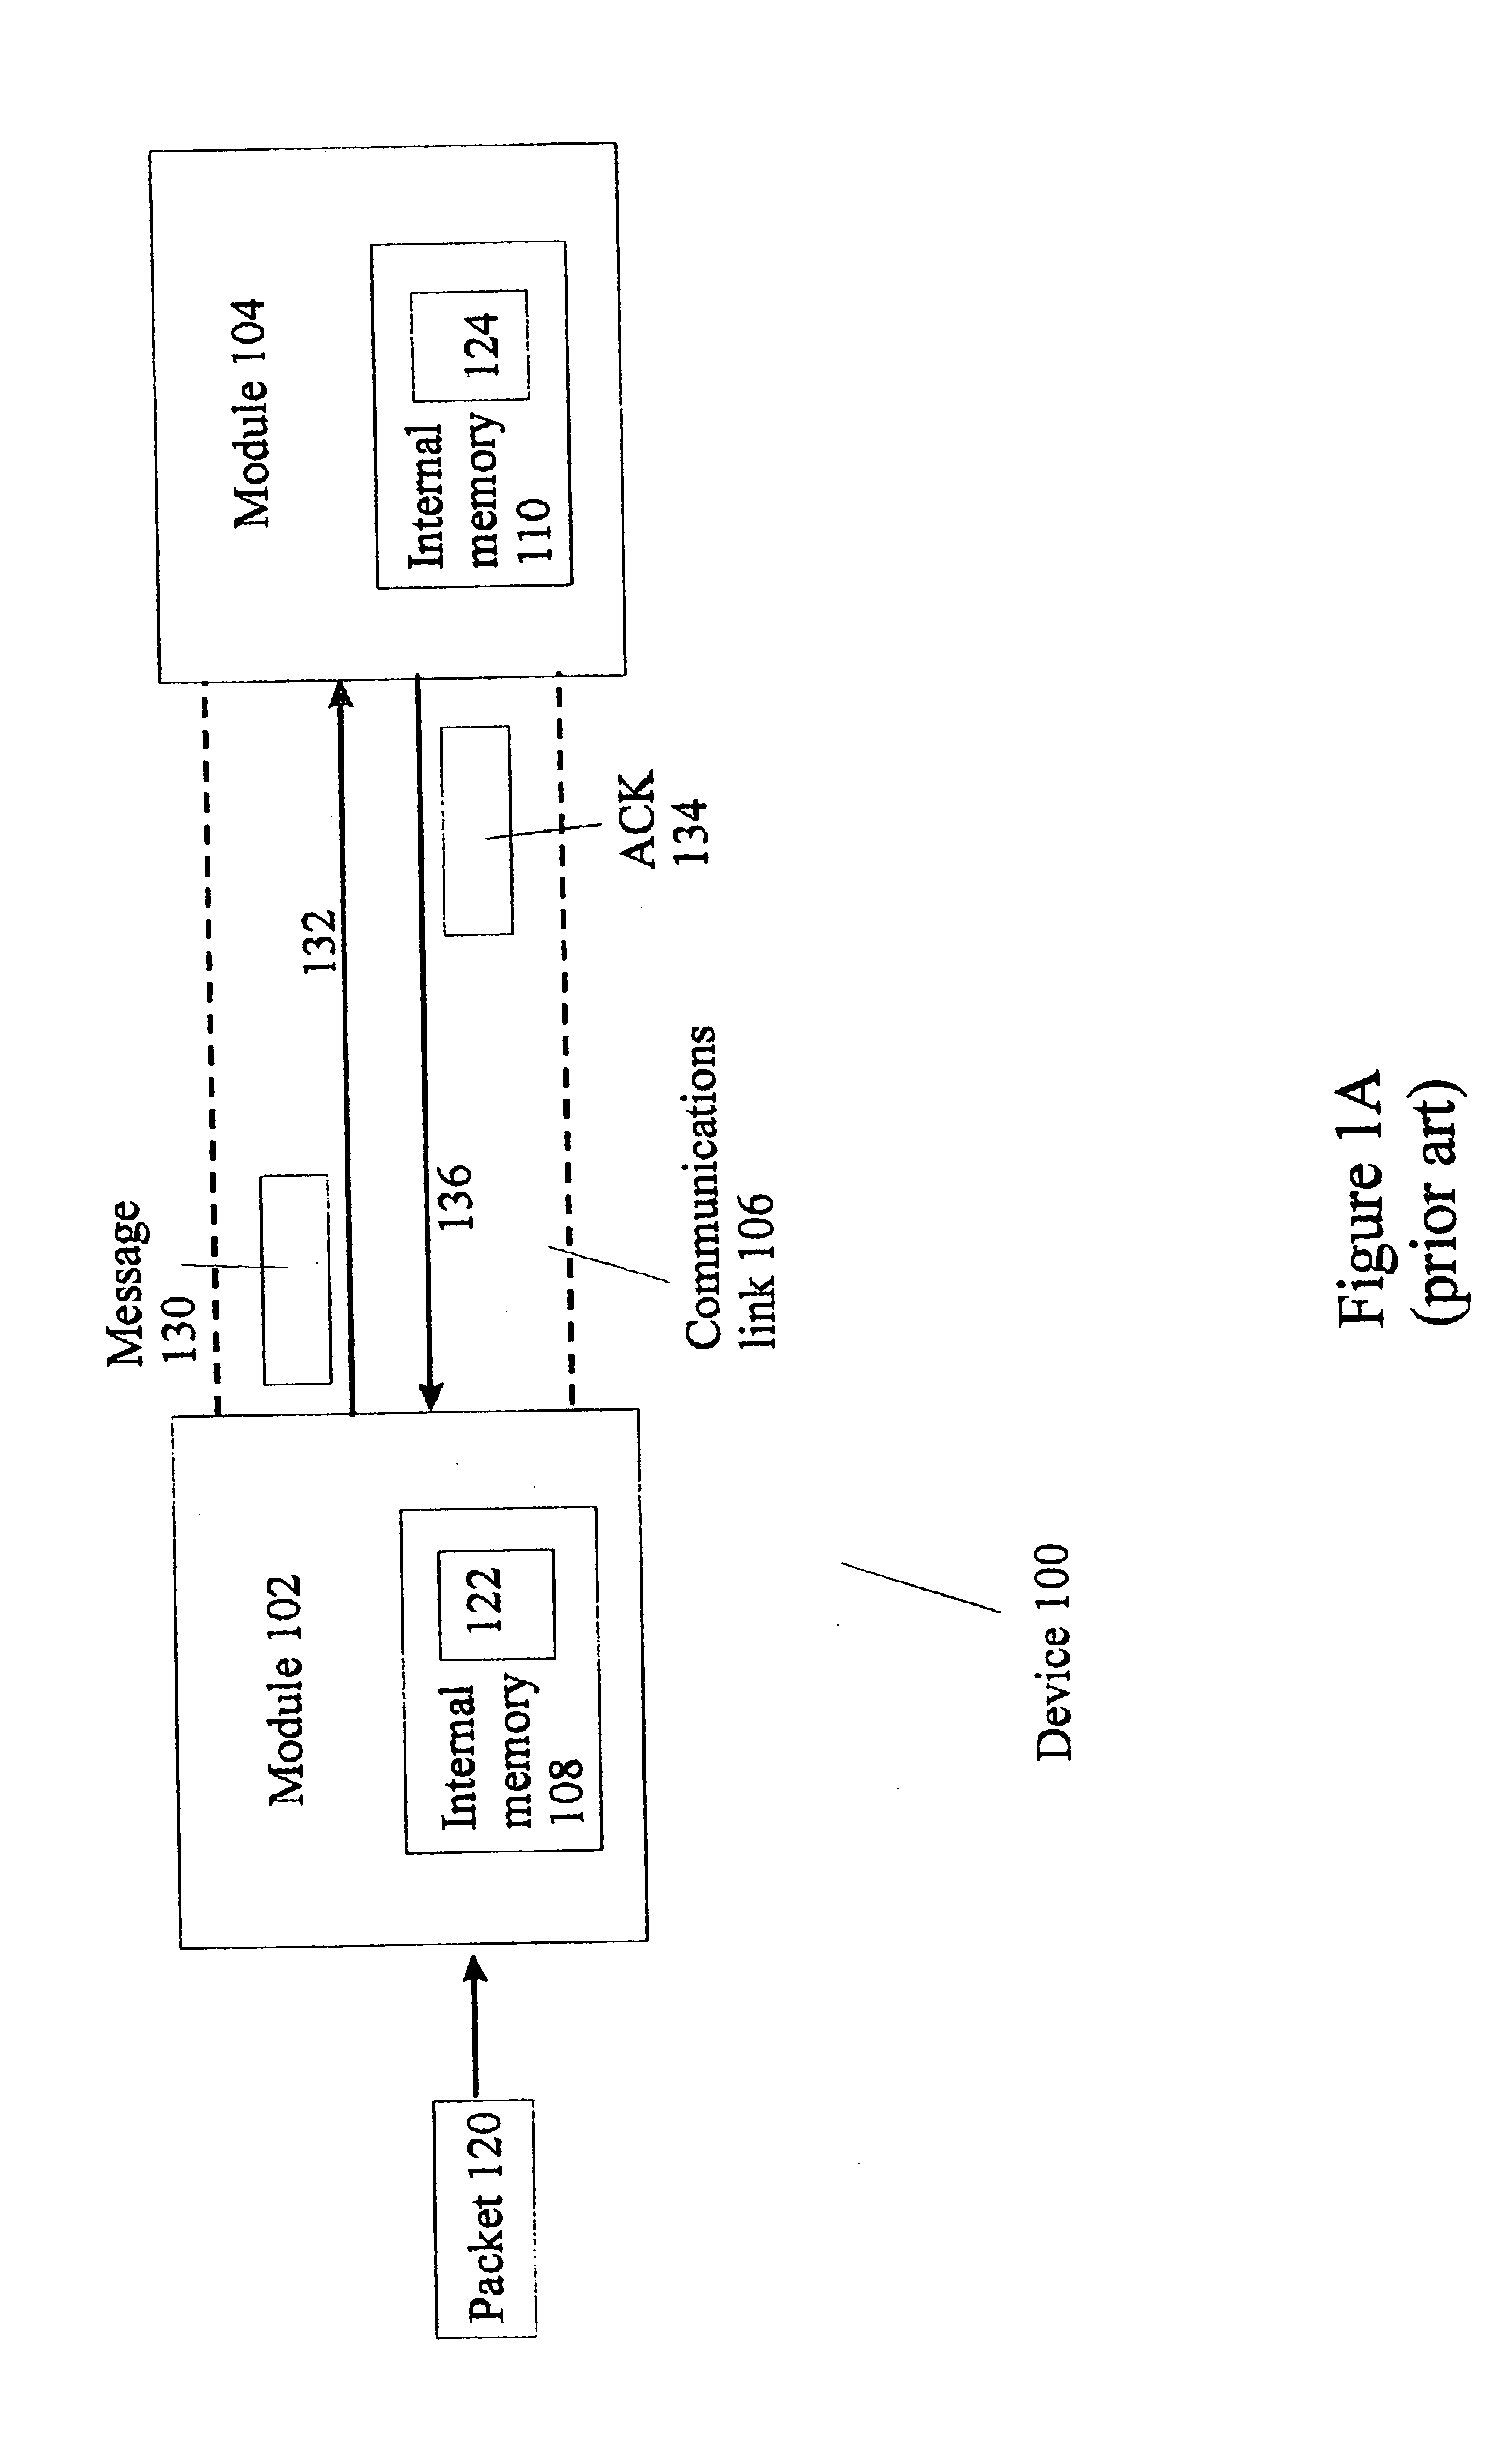 System and method for detecting lost messages transmitted between modules in a communication device